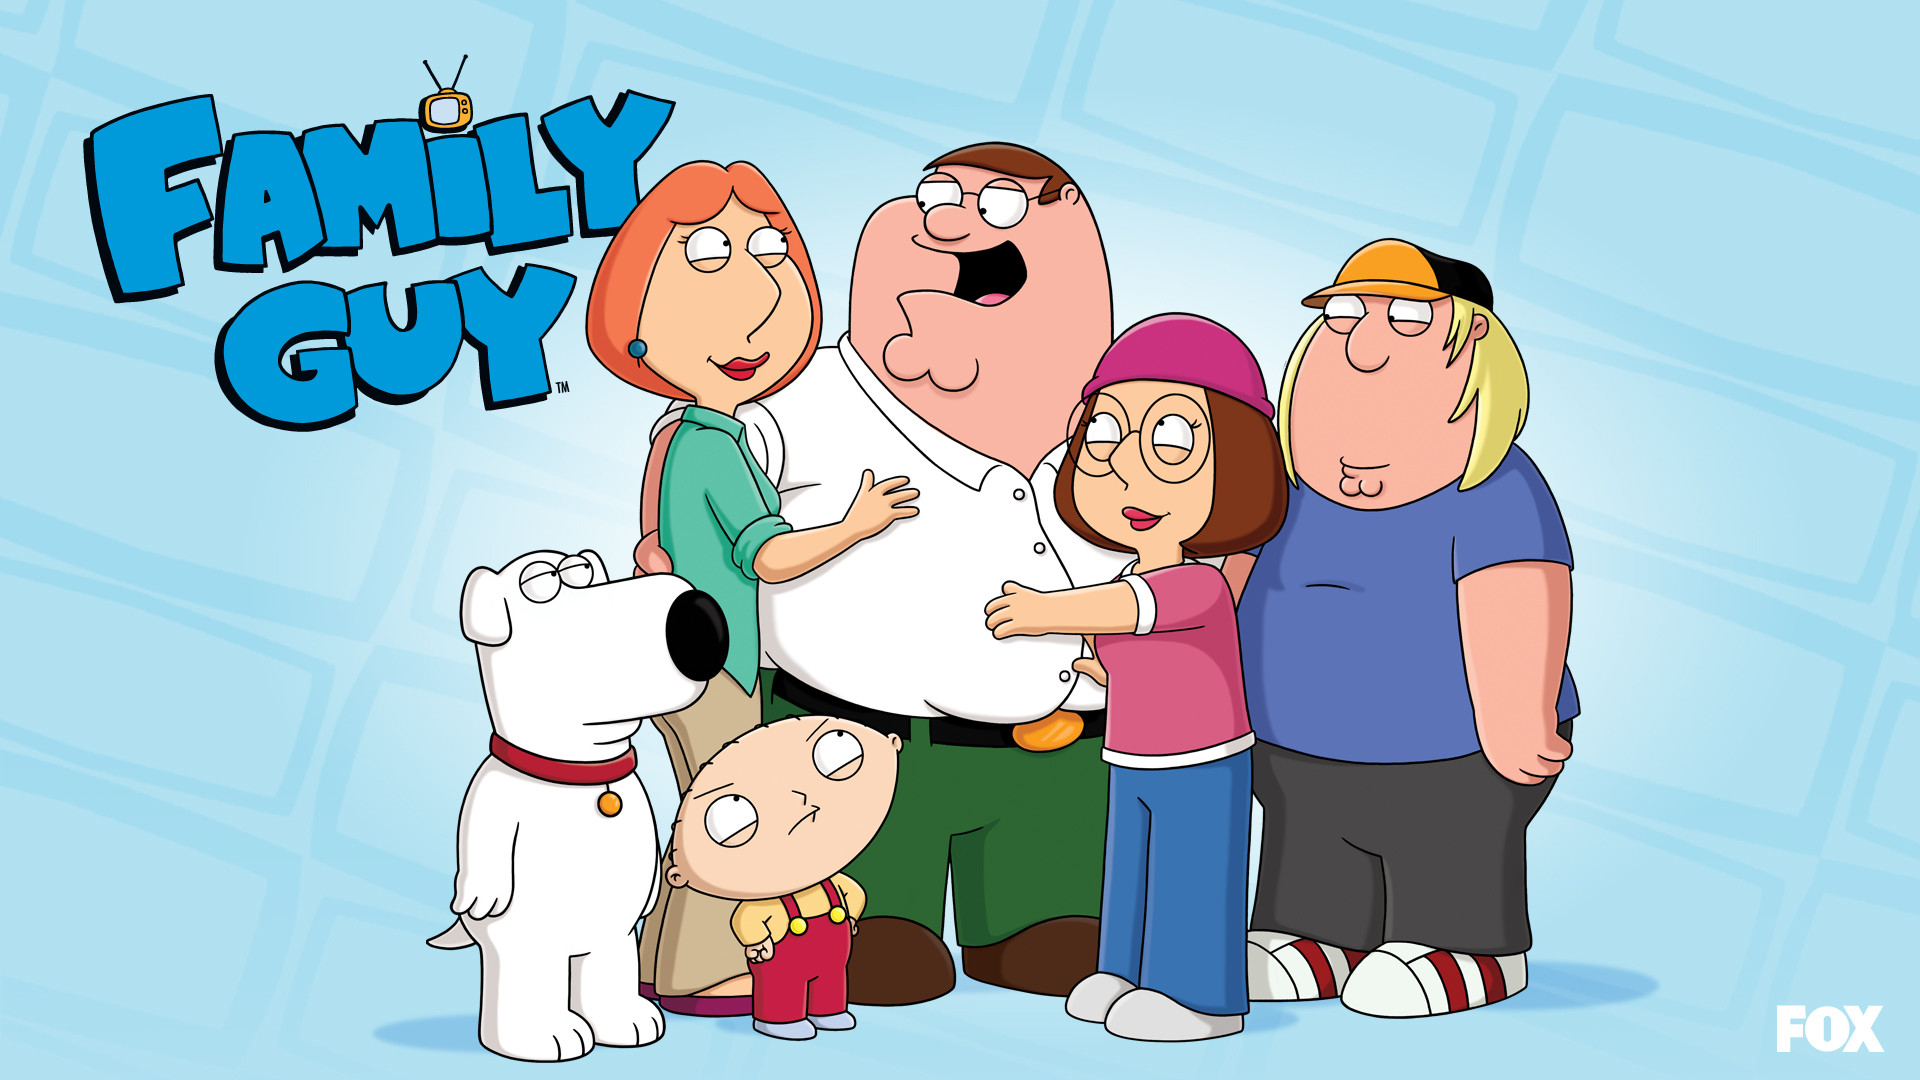 Will Be in an Episode of Family Guy Later This Year | How2BeCool .